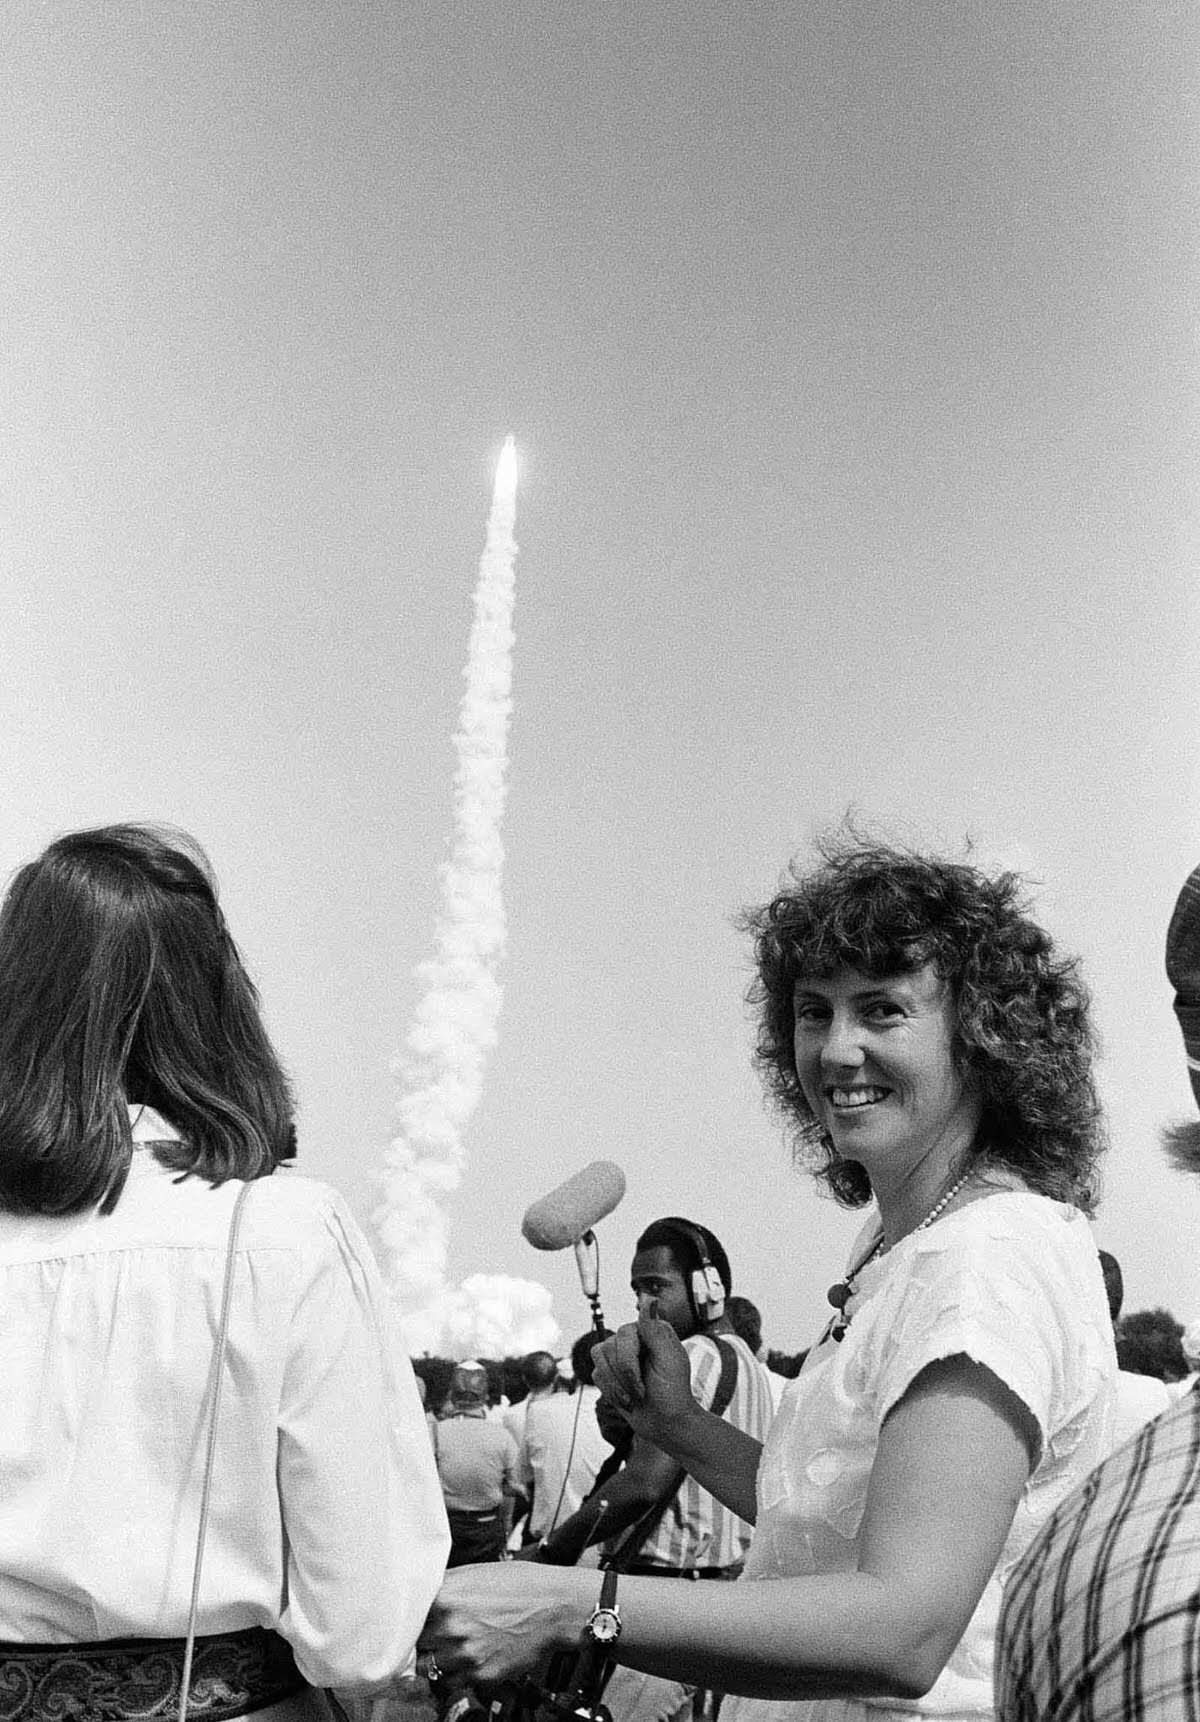 Christa McAuliffe watches a successful launch of the space shuttle Challenger after being selected to join a later mission. Oct. 30, 1985.